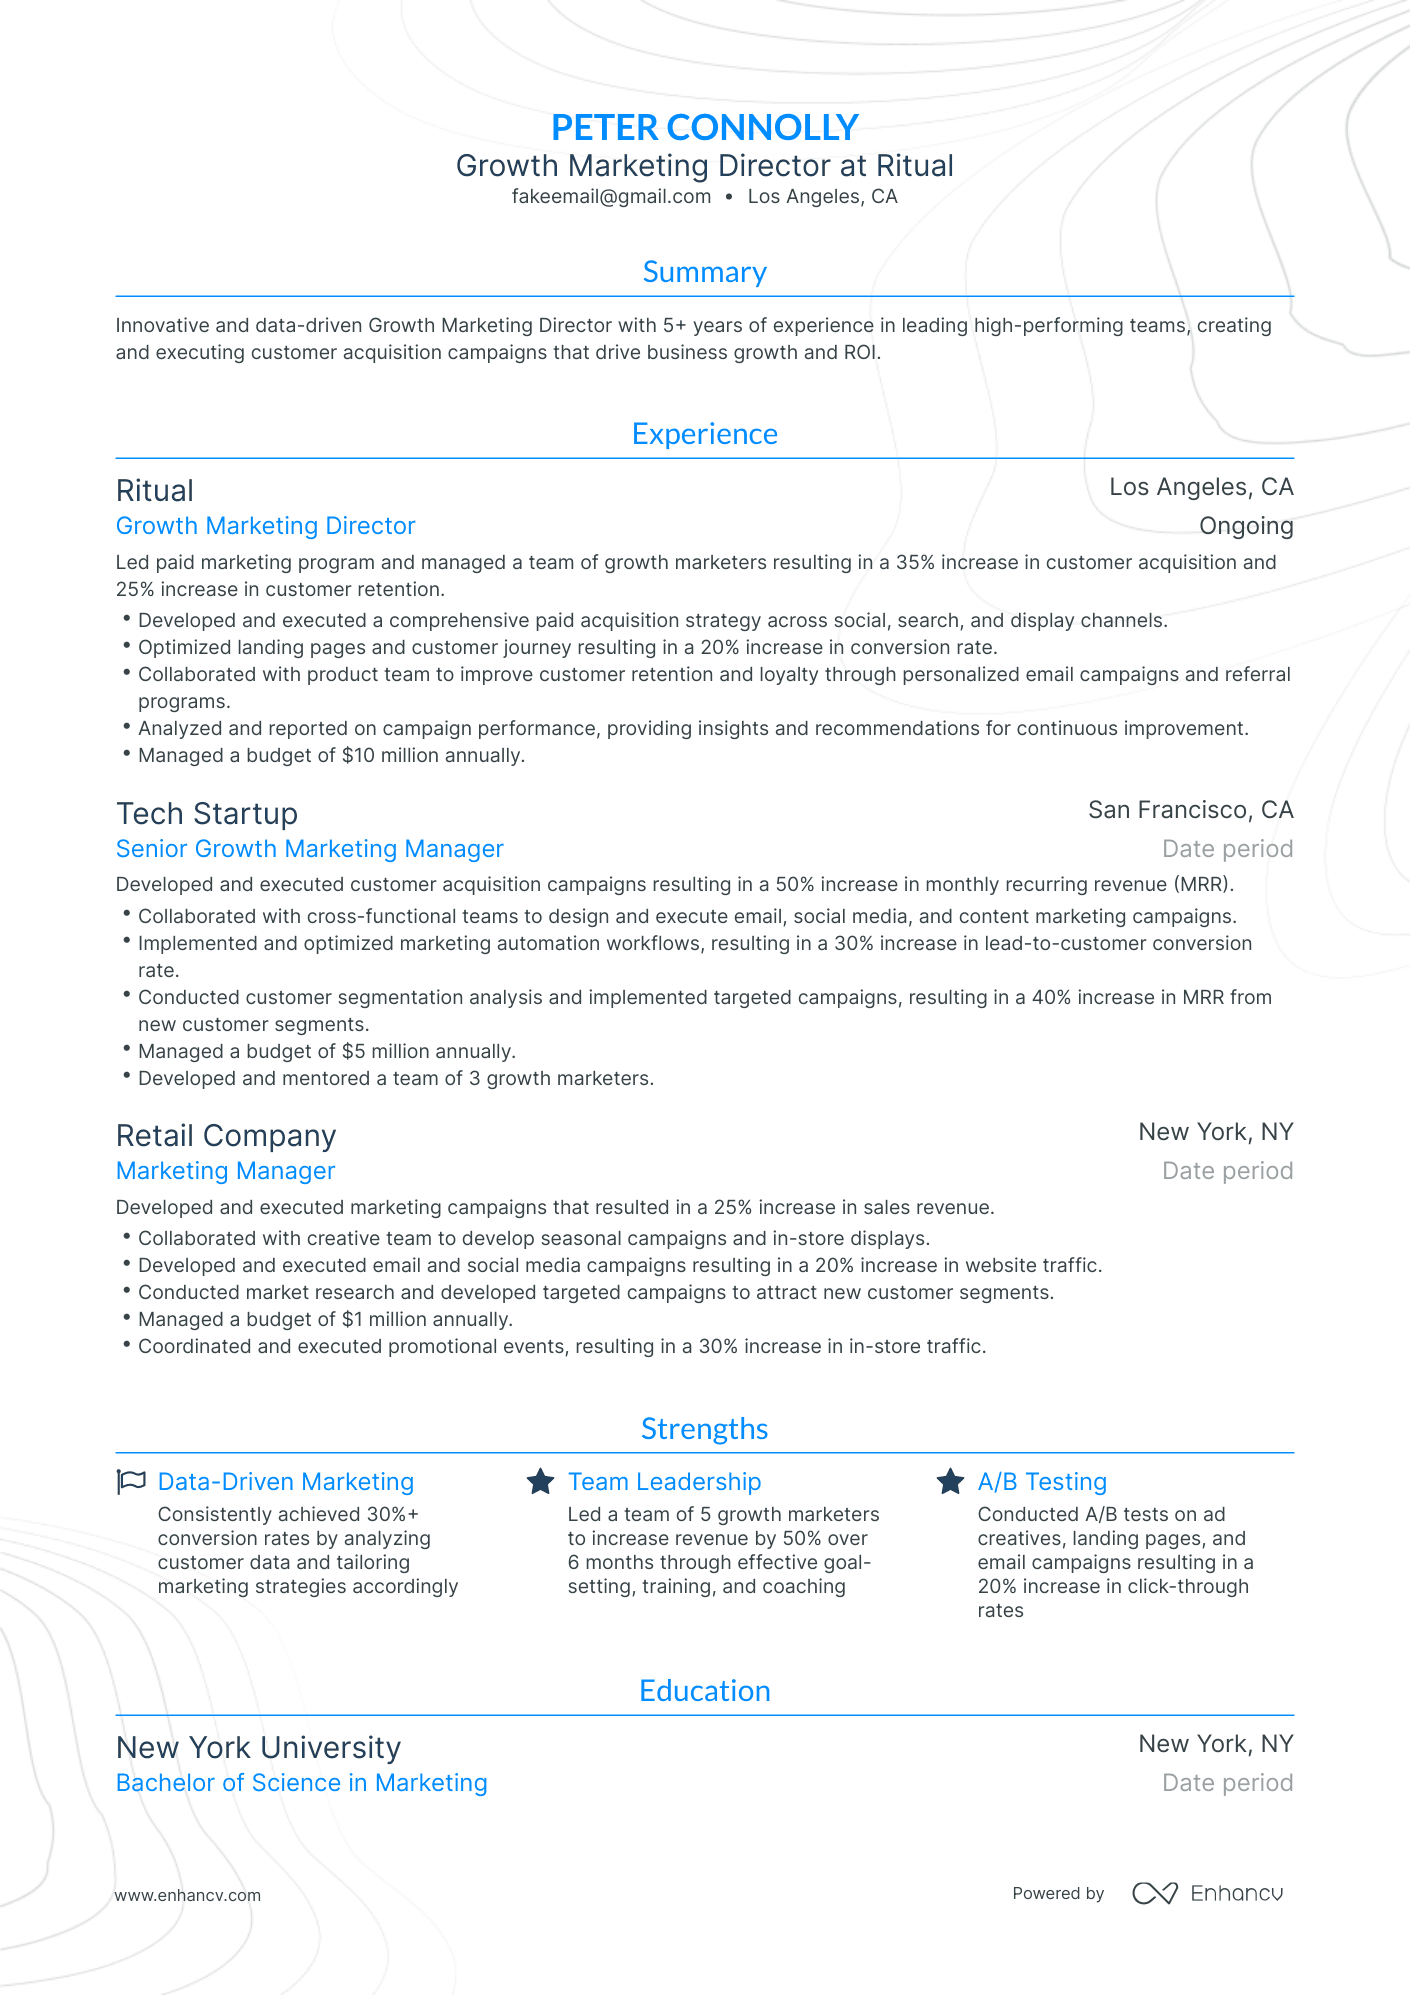 Traditional Growth Marketing Resume Template